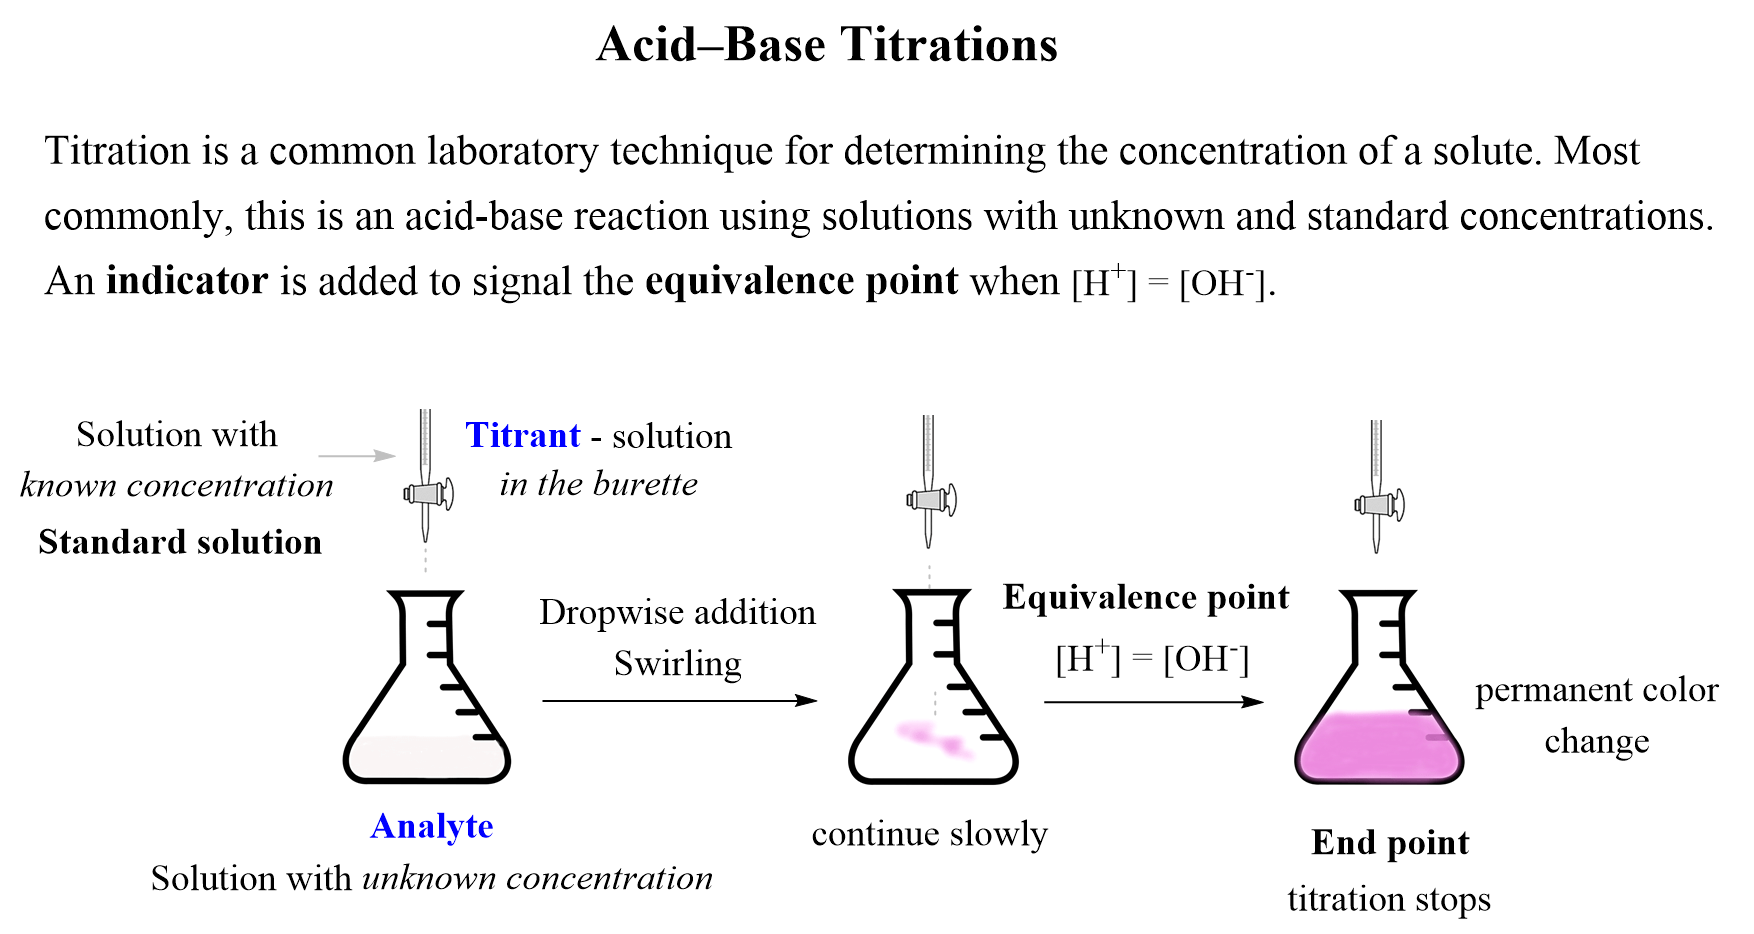 Acid base titrations - titrant analyte equivalence point and point